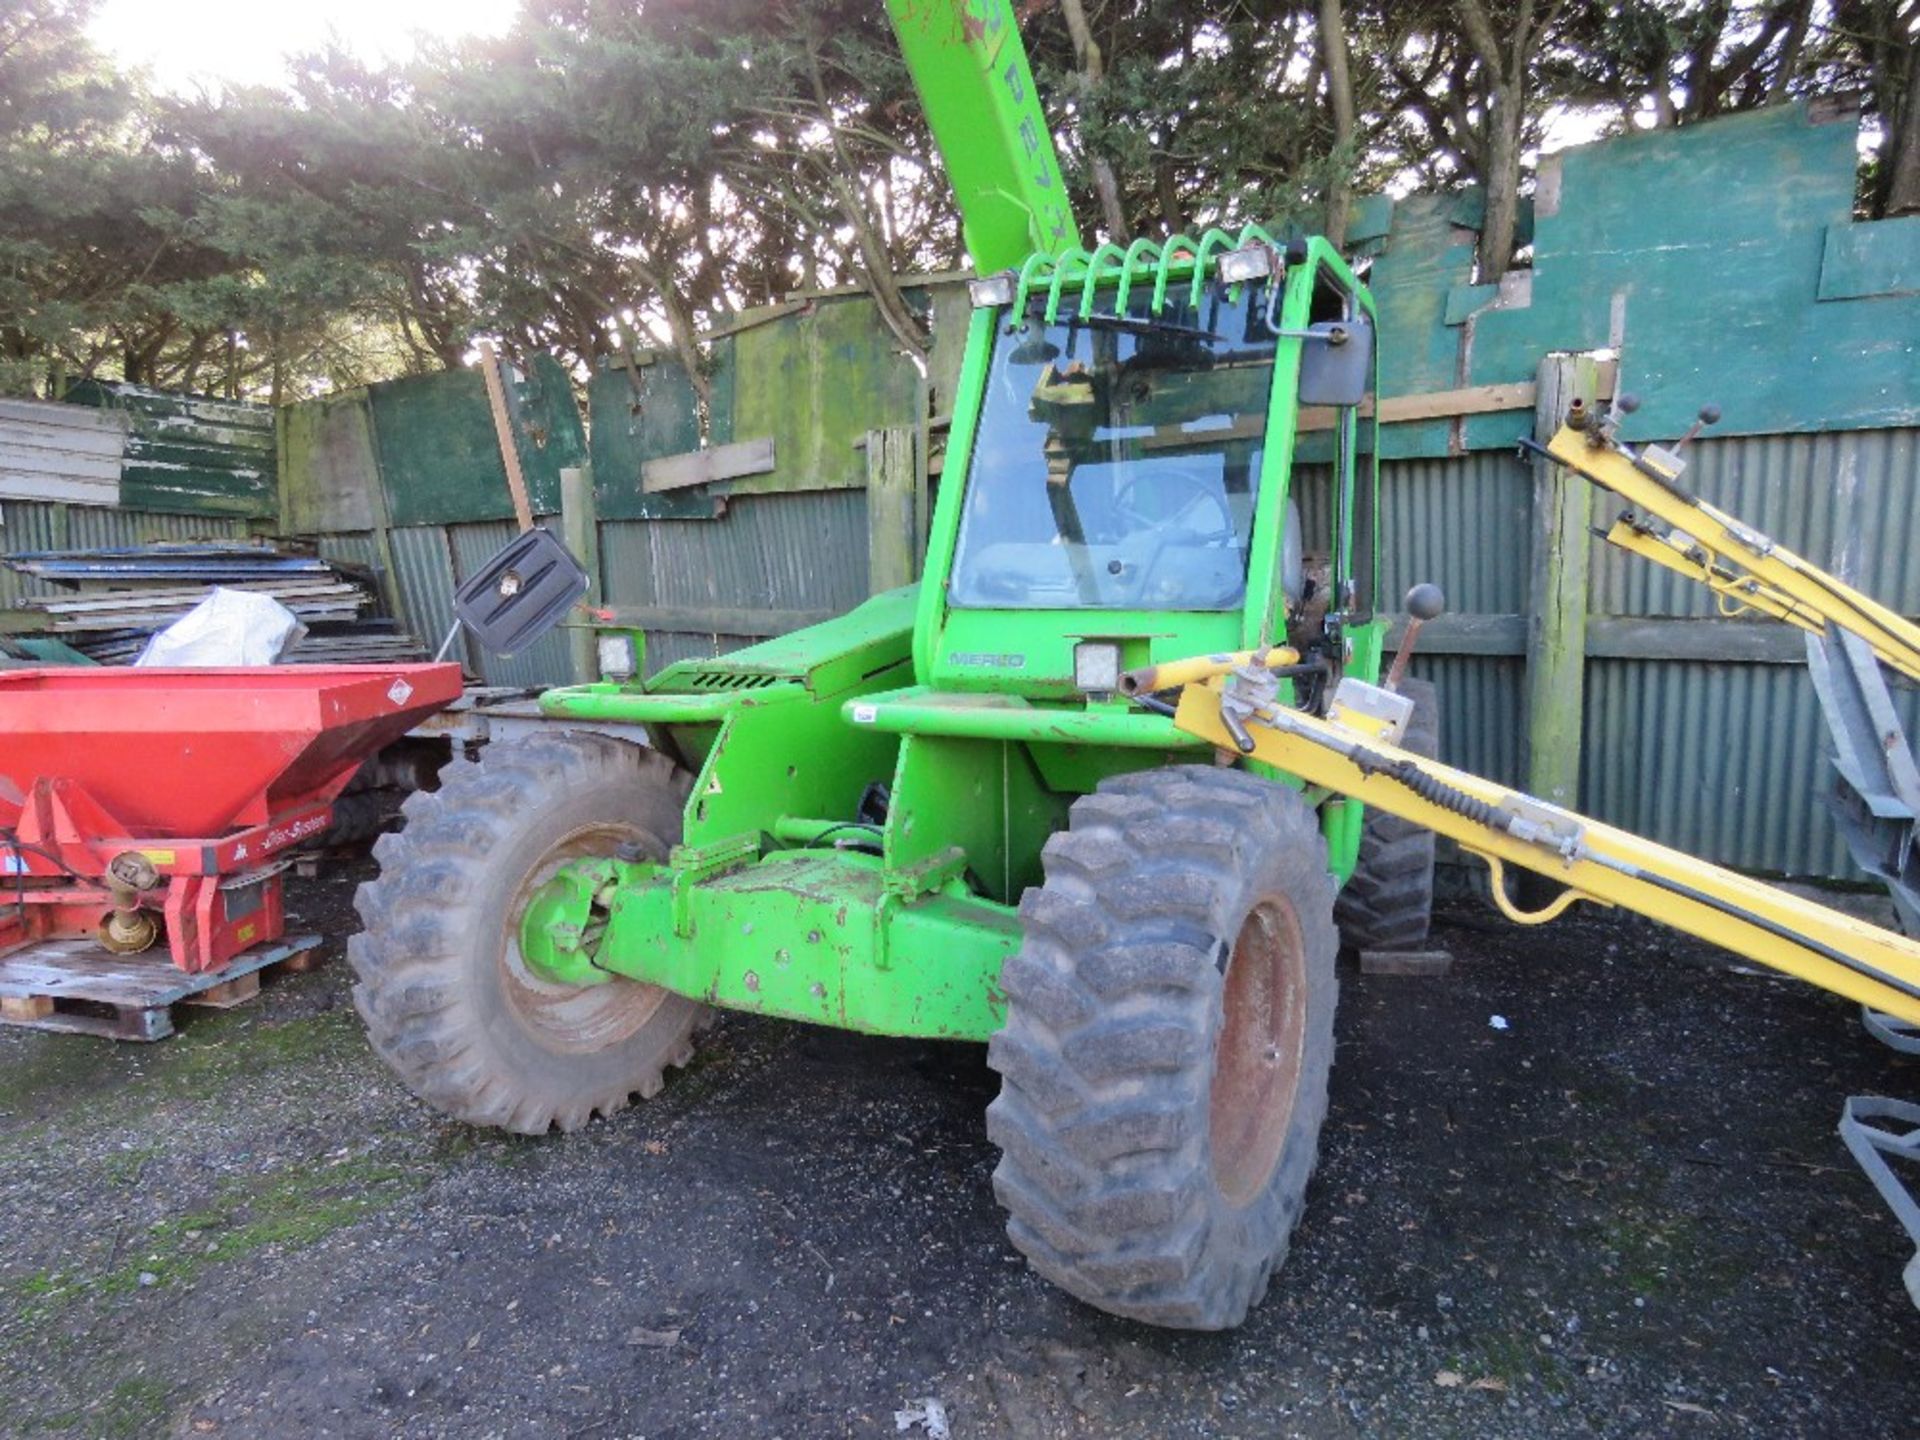 MERLO P27.7EVS TELEHANDLER. 6326 RECORDED HOURS. PERKINS ENGINE. SN: 4111137 DIRECT FROM LOCAL COMPA - Image 3 of 11